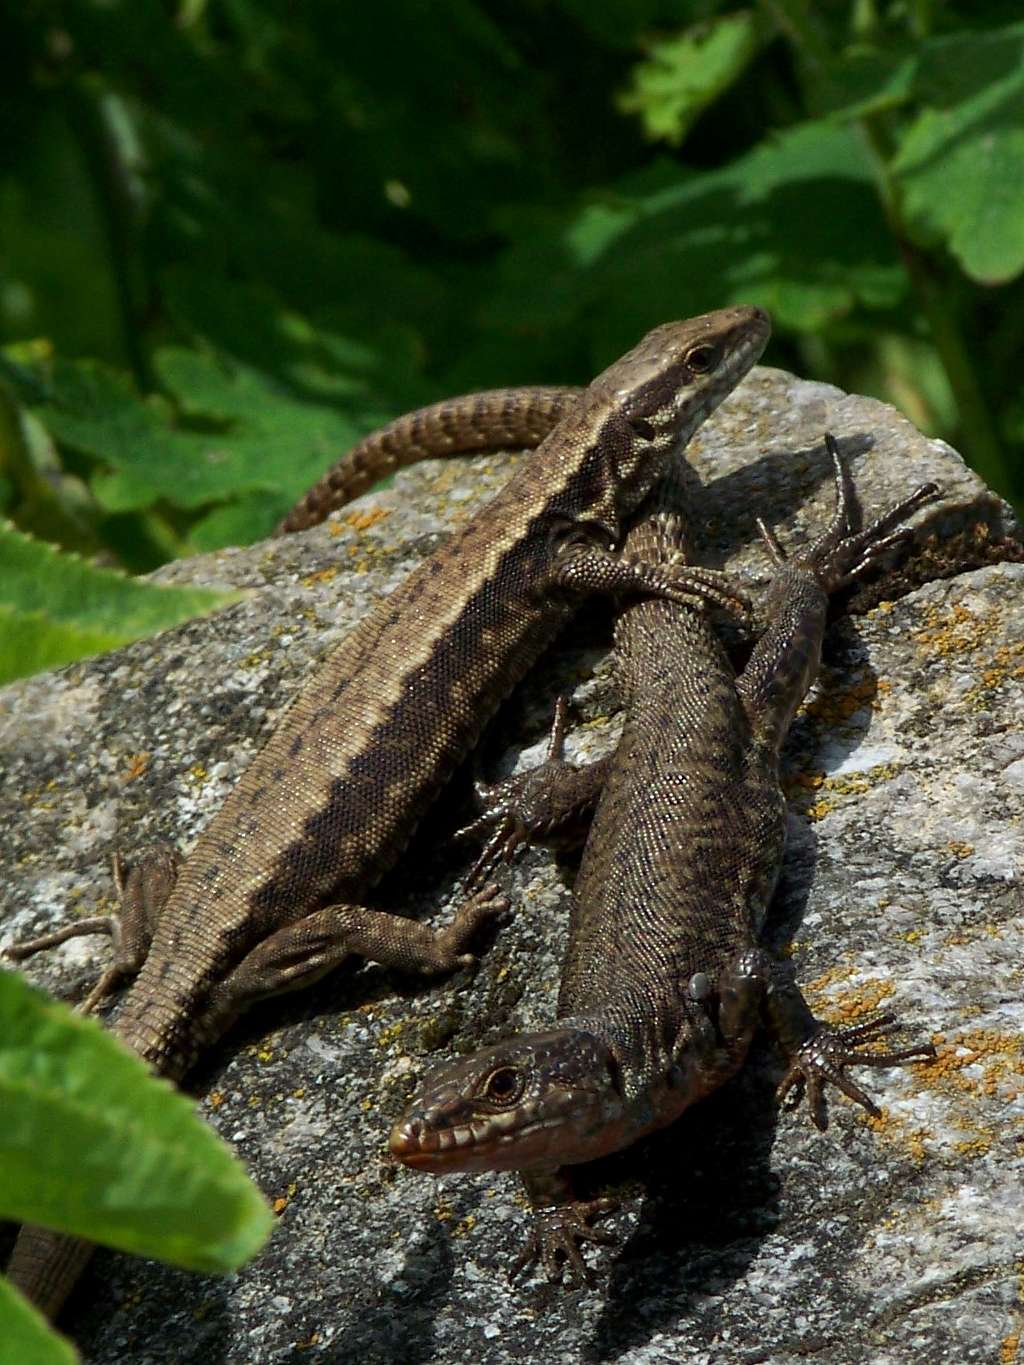 Common wall lizards